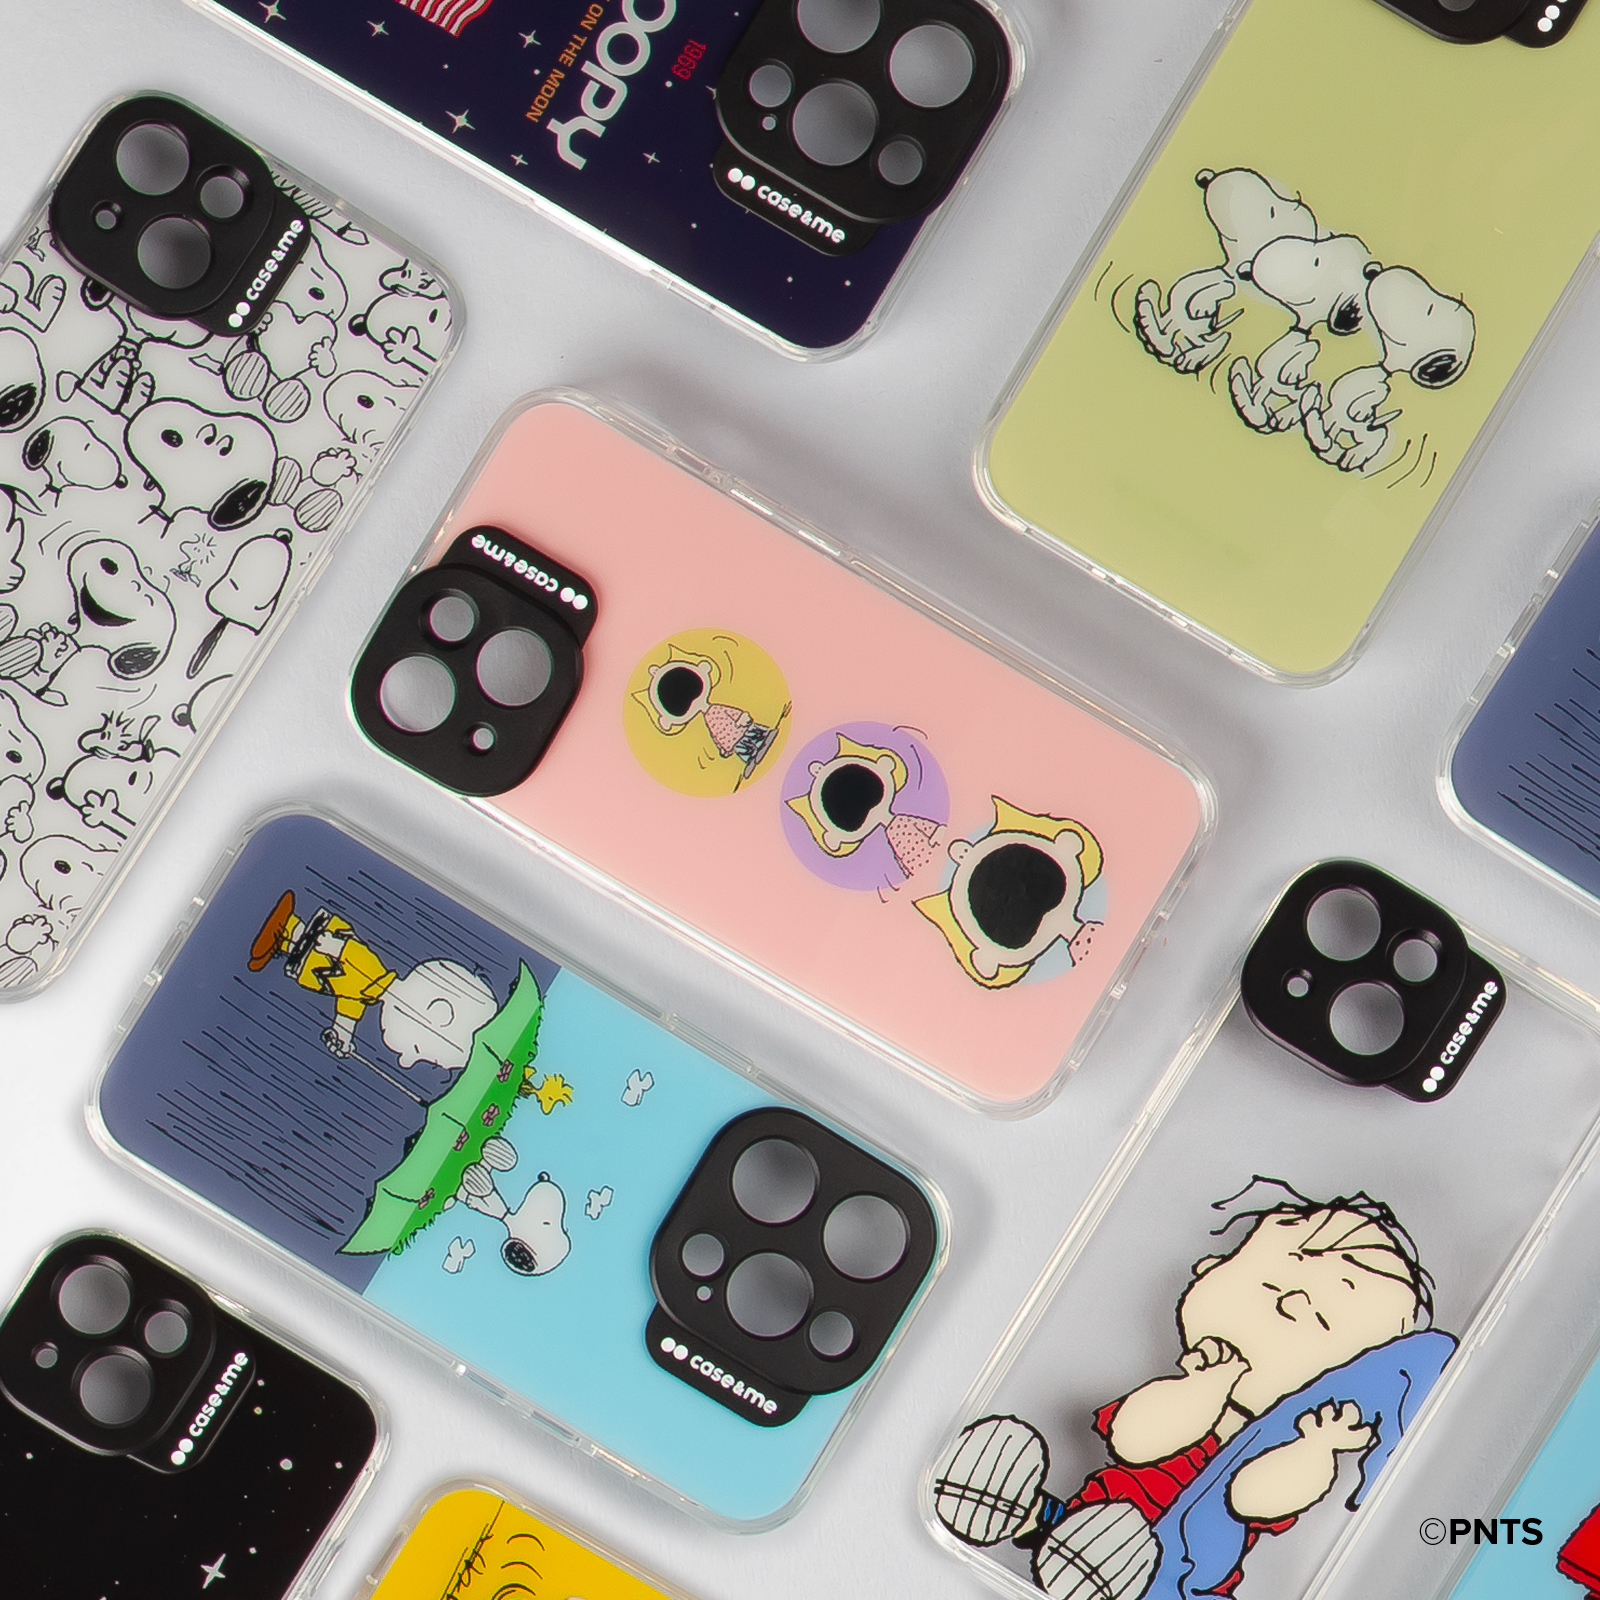 SBS case&me Peanuts cover cam logo fr iPhone 14 design3 Sally pink